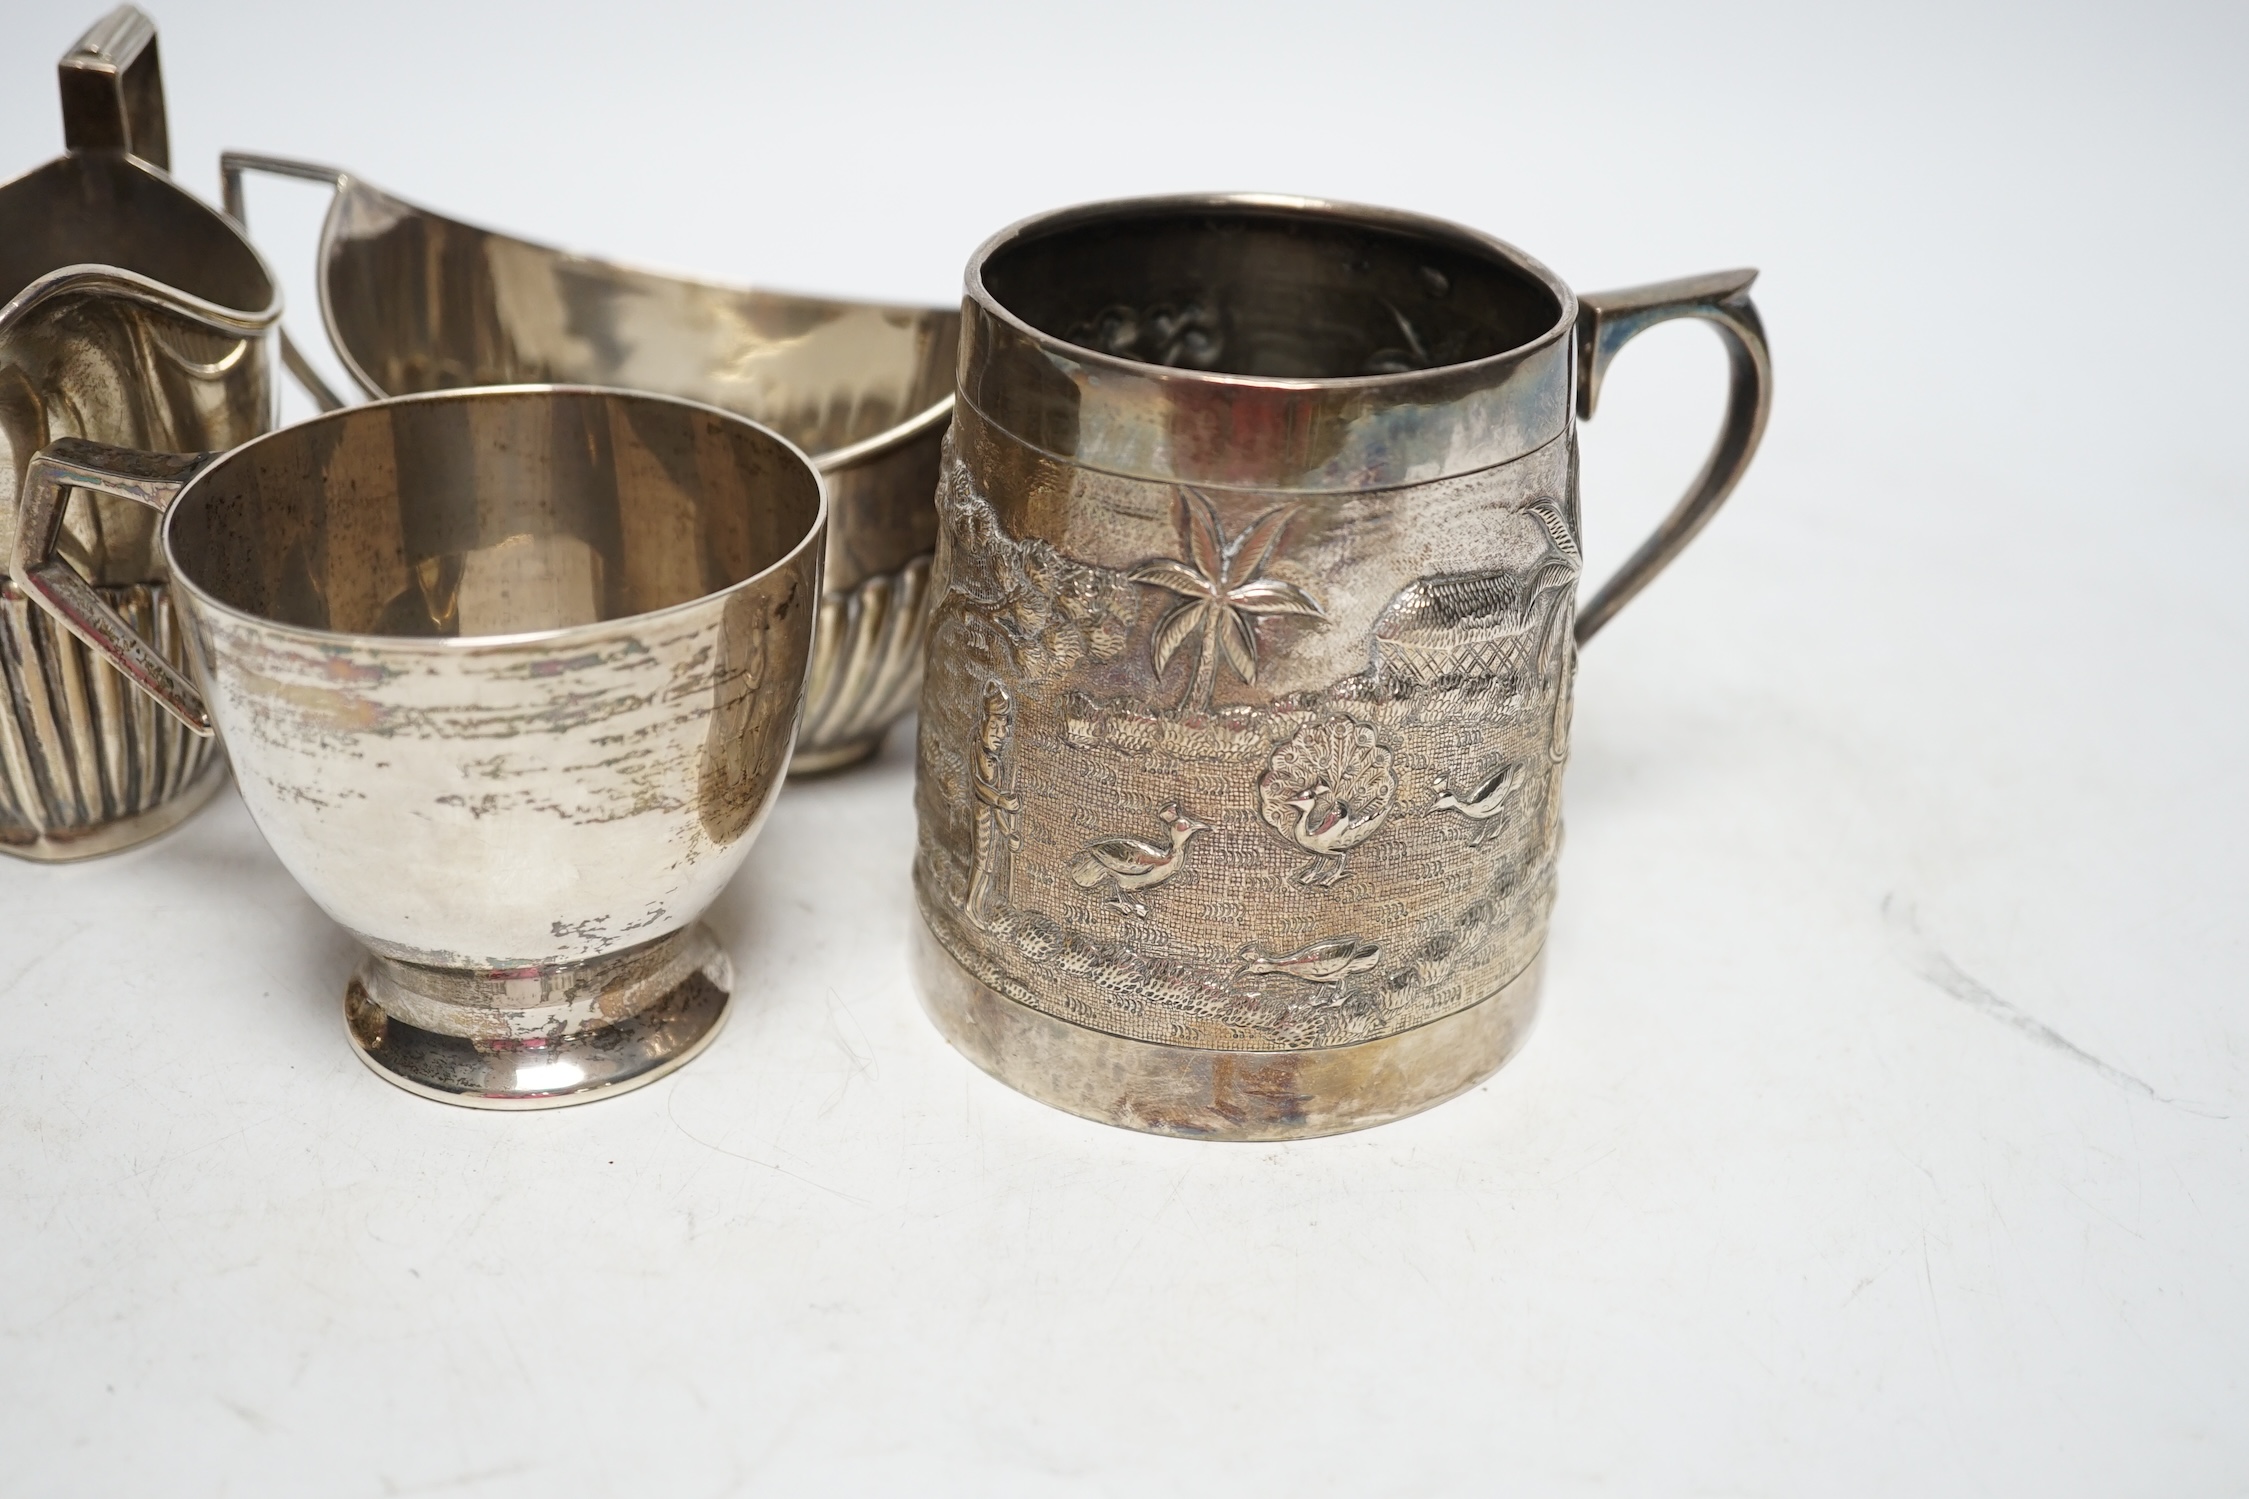 Two early 20th century demi-fluted silver cream jugs and a similar sugar bowl, an Irish silver tea cup and an Indian? white metal mug, gross weight 16.7oz. Fair condition.